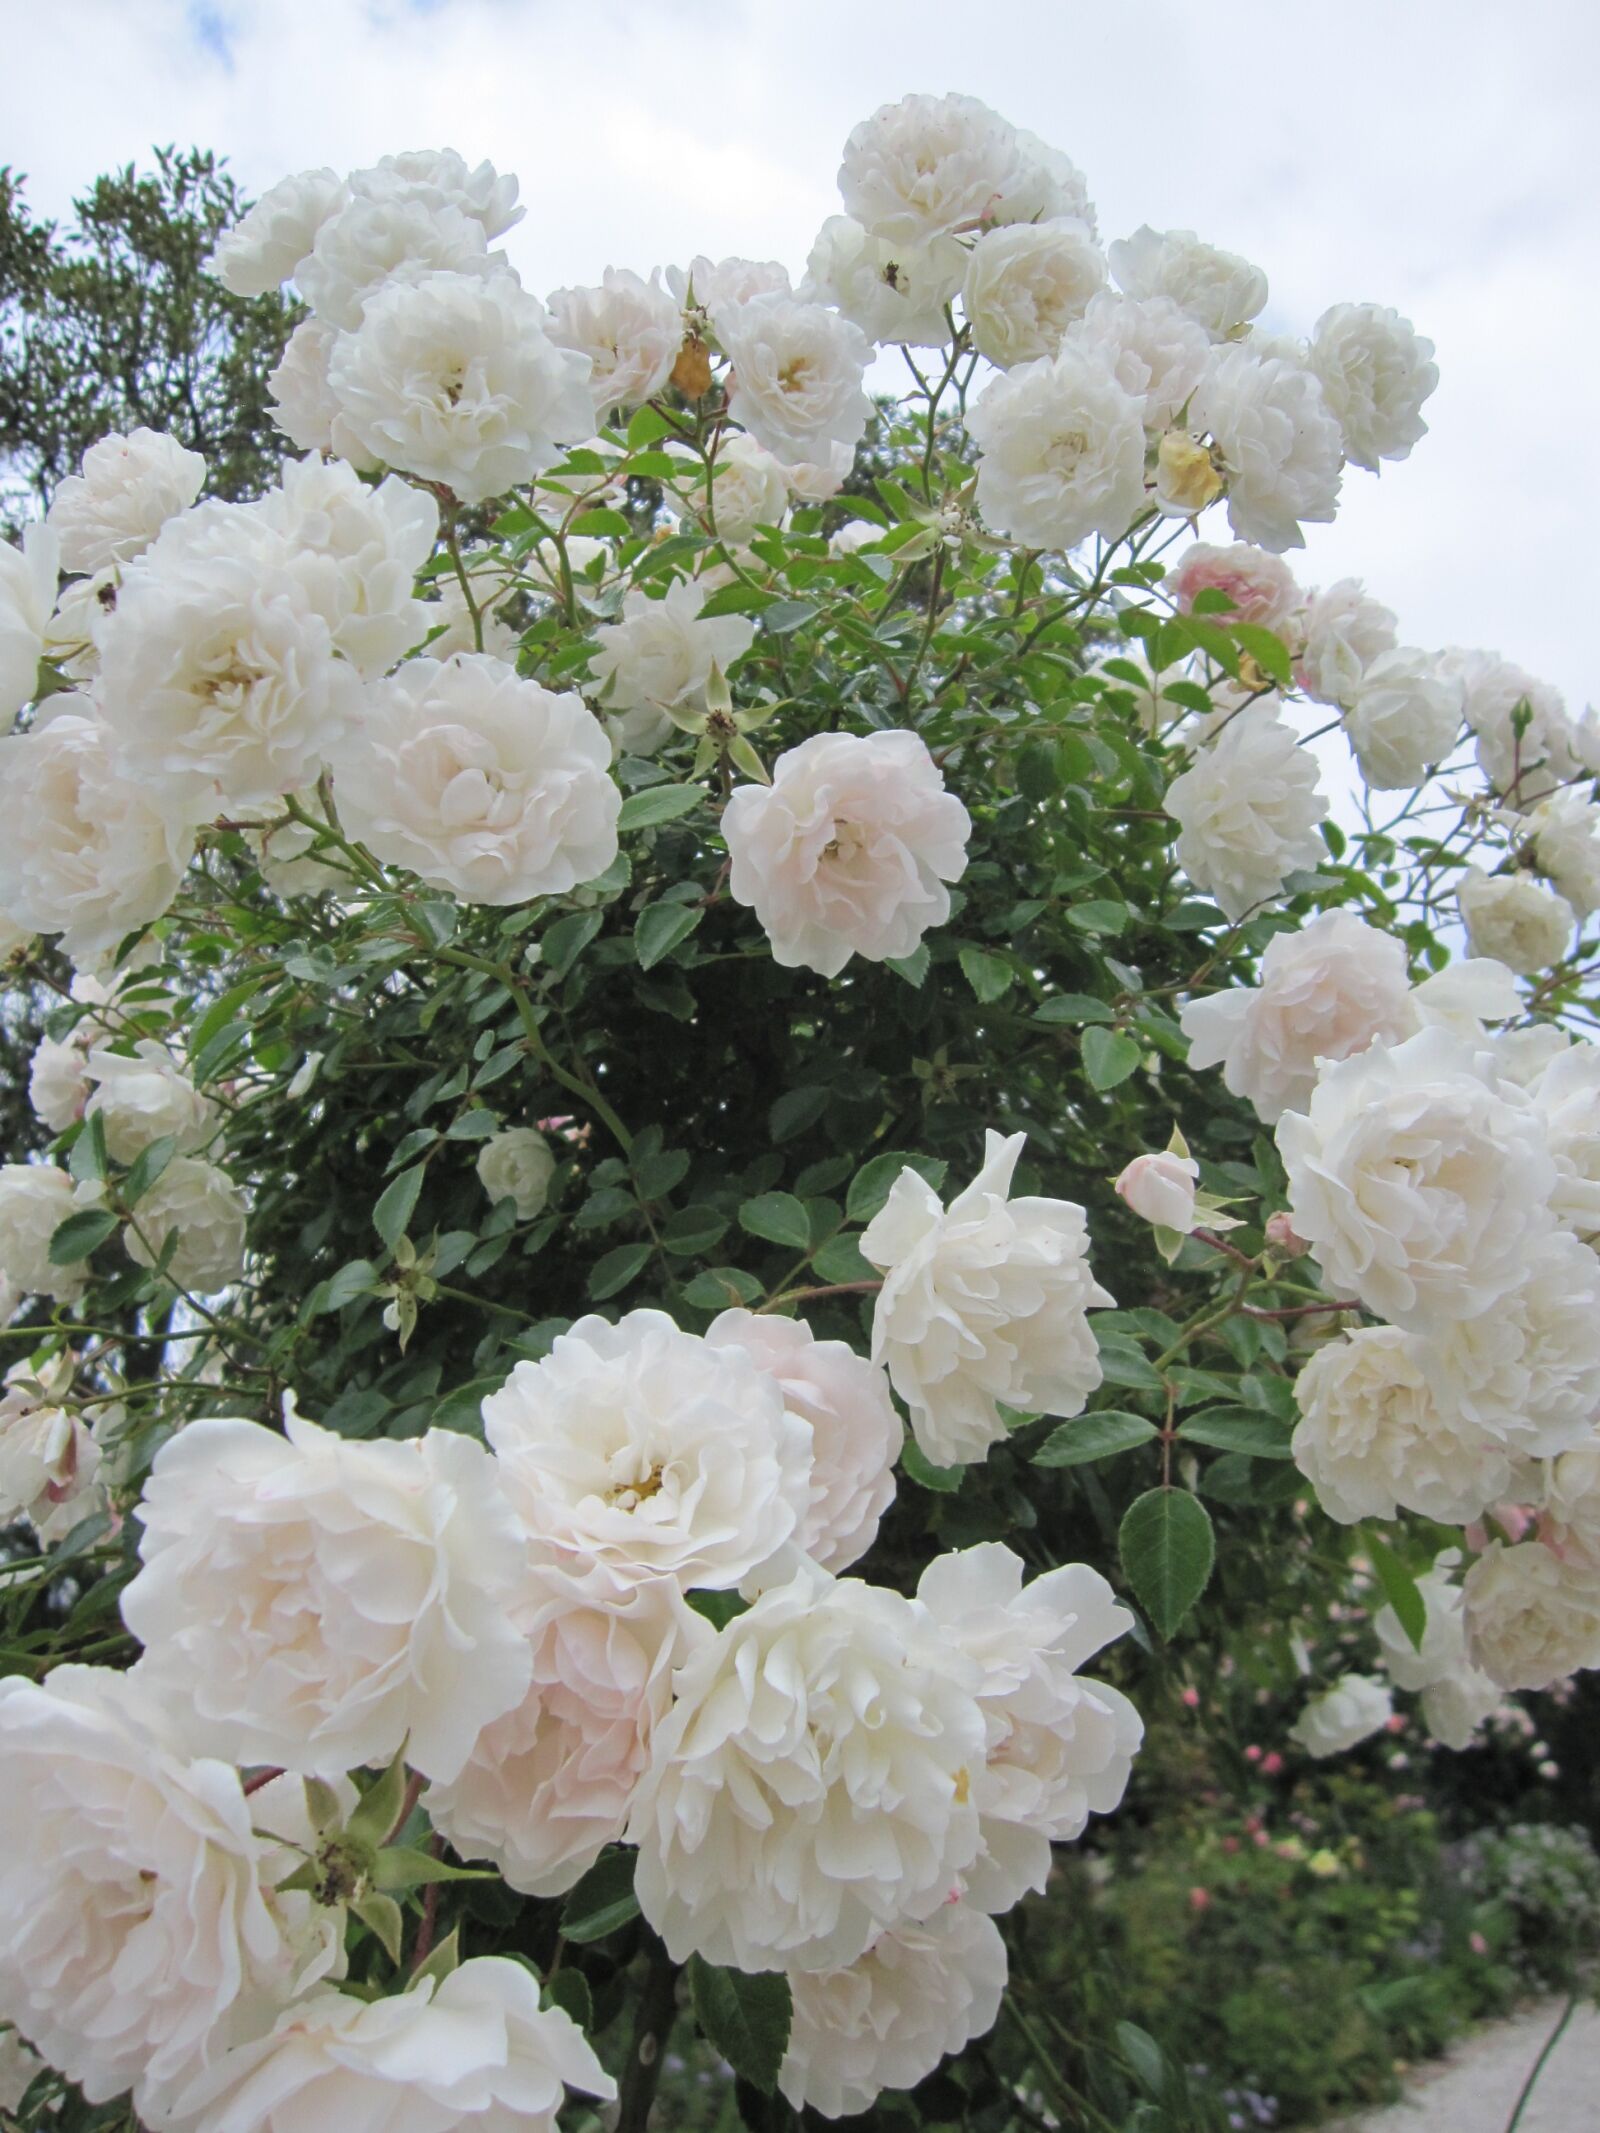 Canon PowerShot SD960 IS (Digital IXUS 110 IS / IXY Digital 510 IS) sample photo. Flowers, white rose, nature photography